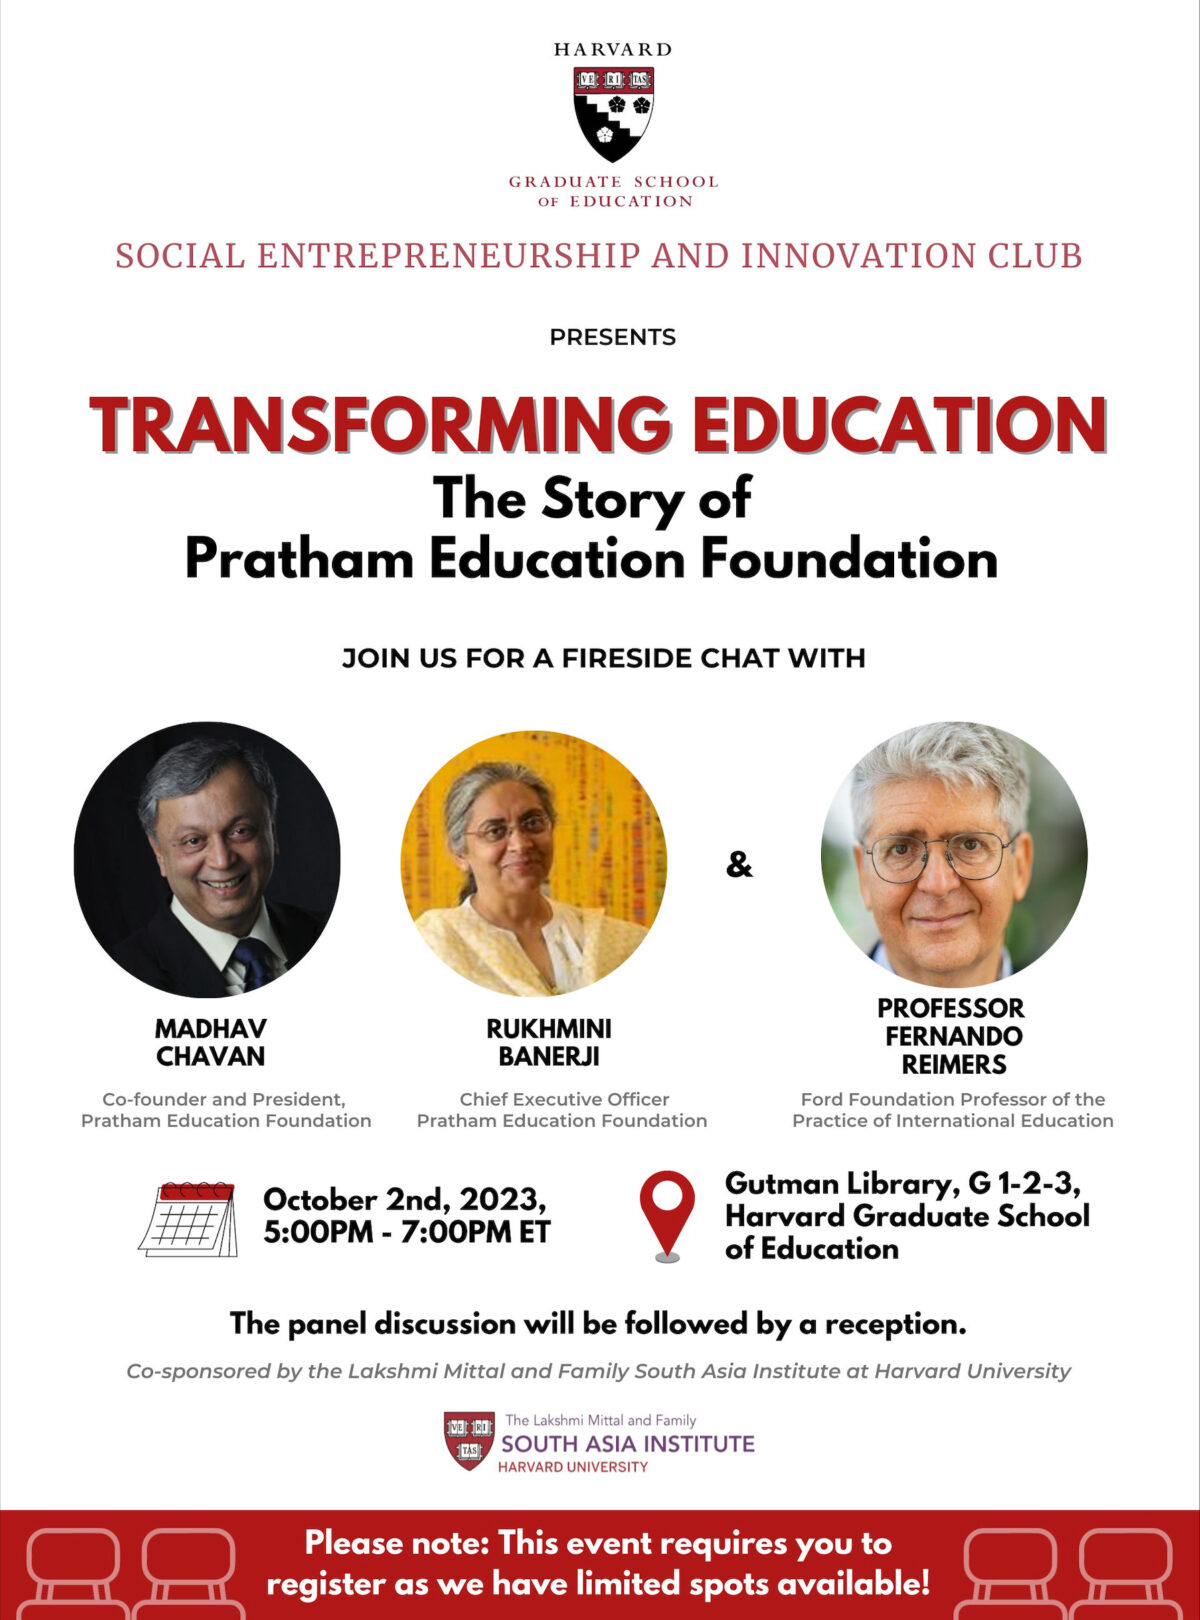 poster on transforming education with pratham education foundation